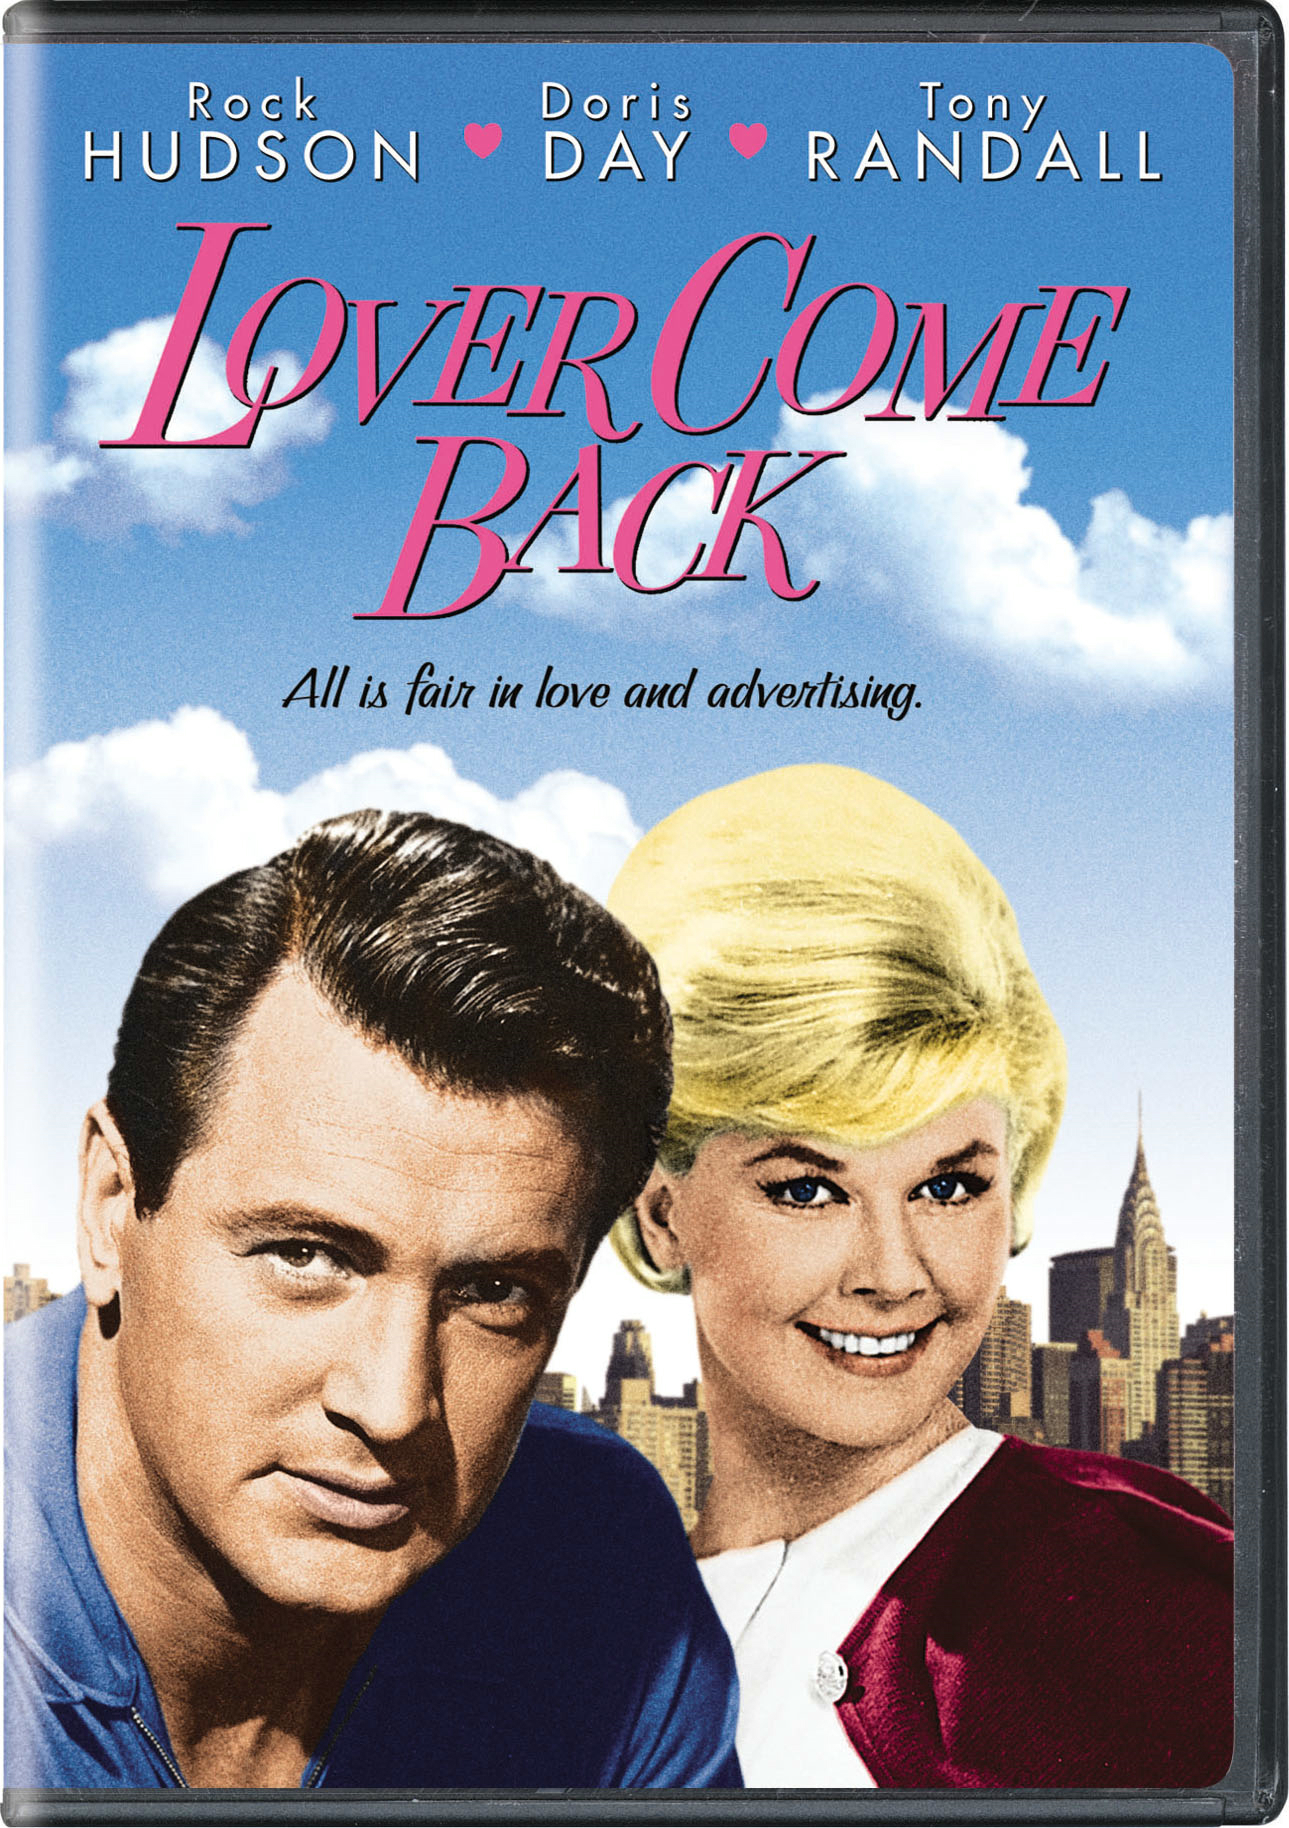 Lover Come Back - DVD [ 1961 ]  - Modern Classic Movies On DVD - Movies On GRUV